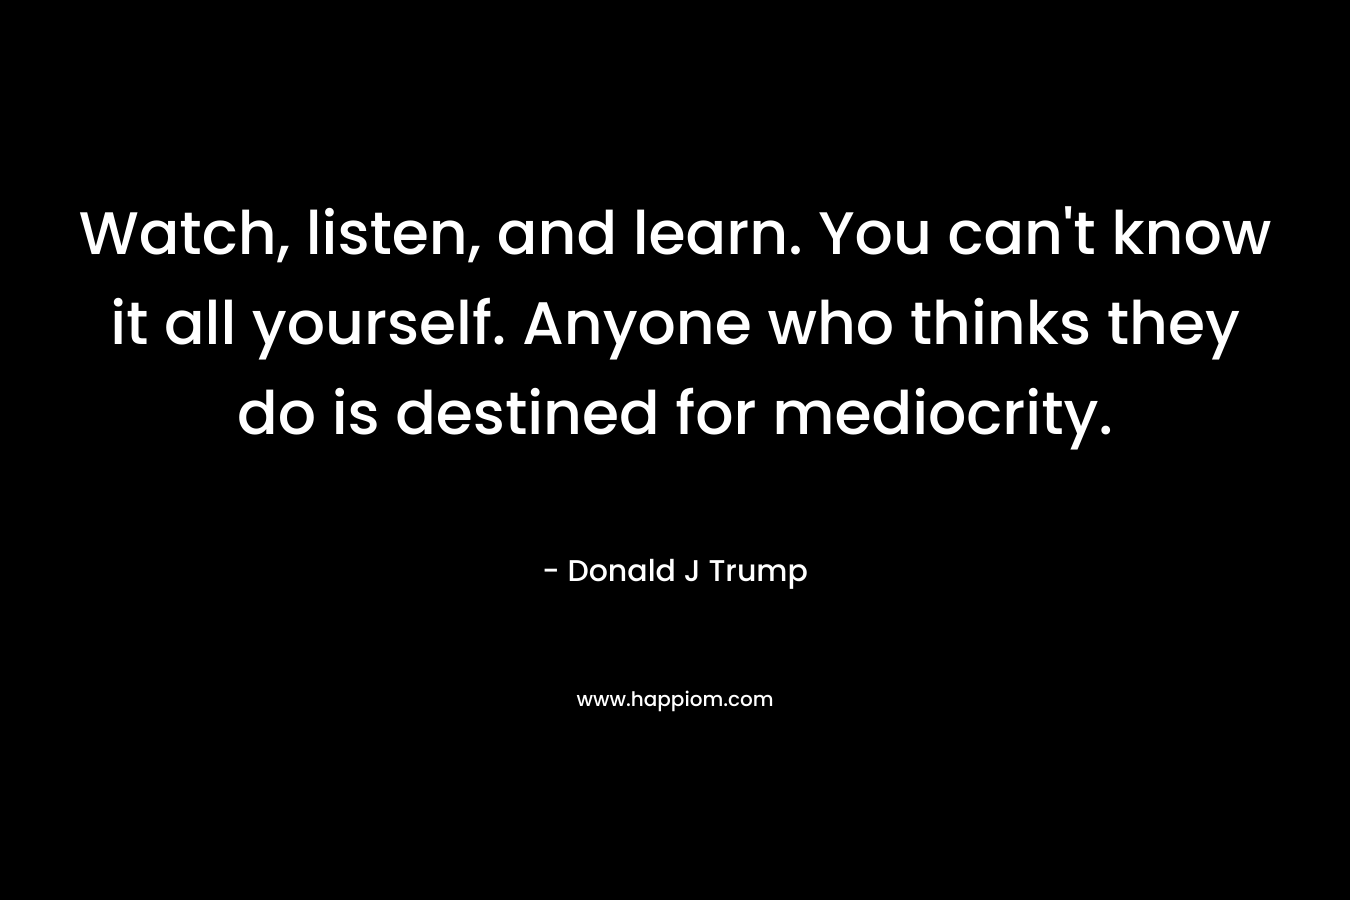 Watch, listen, and learn. You can't know it all yourself. Anyone who thinks they do is destined for mediocrity.